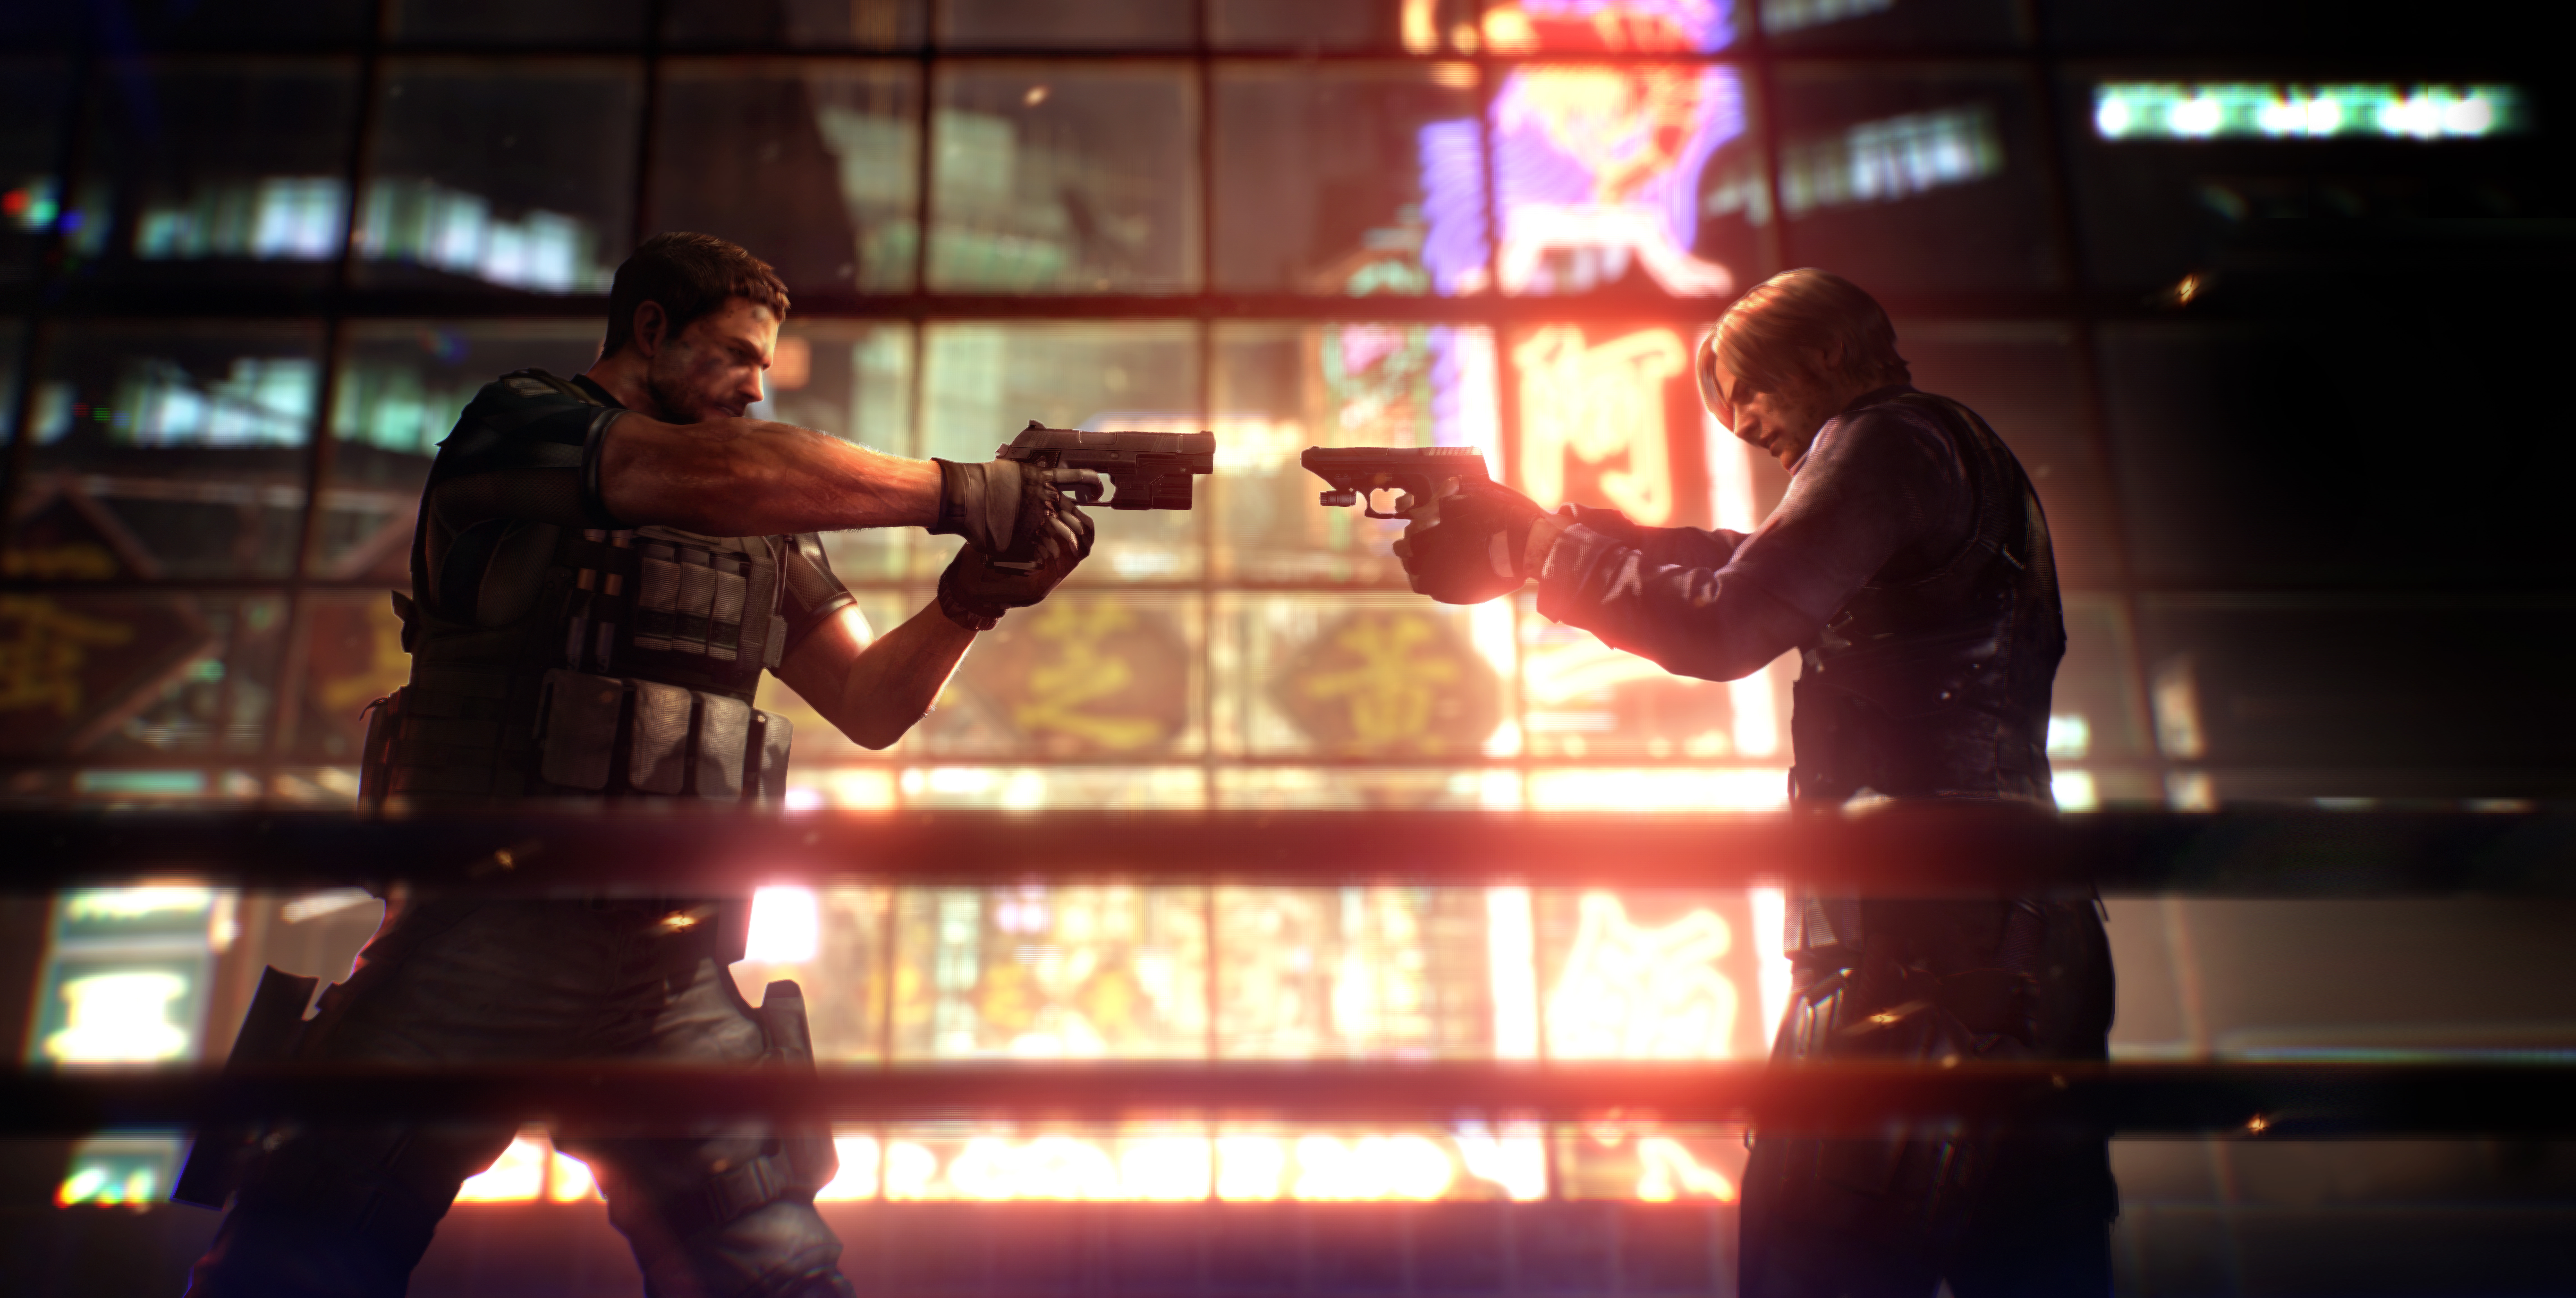 Resident Evil 6 Picture